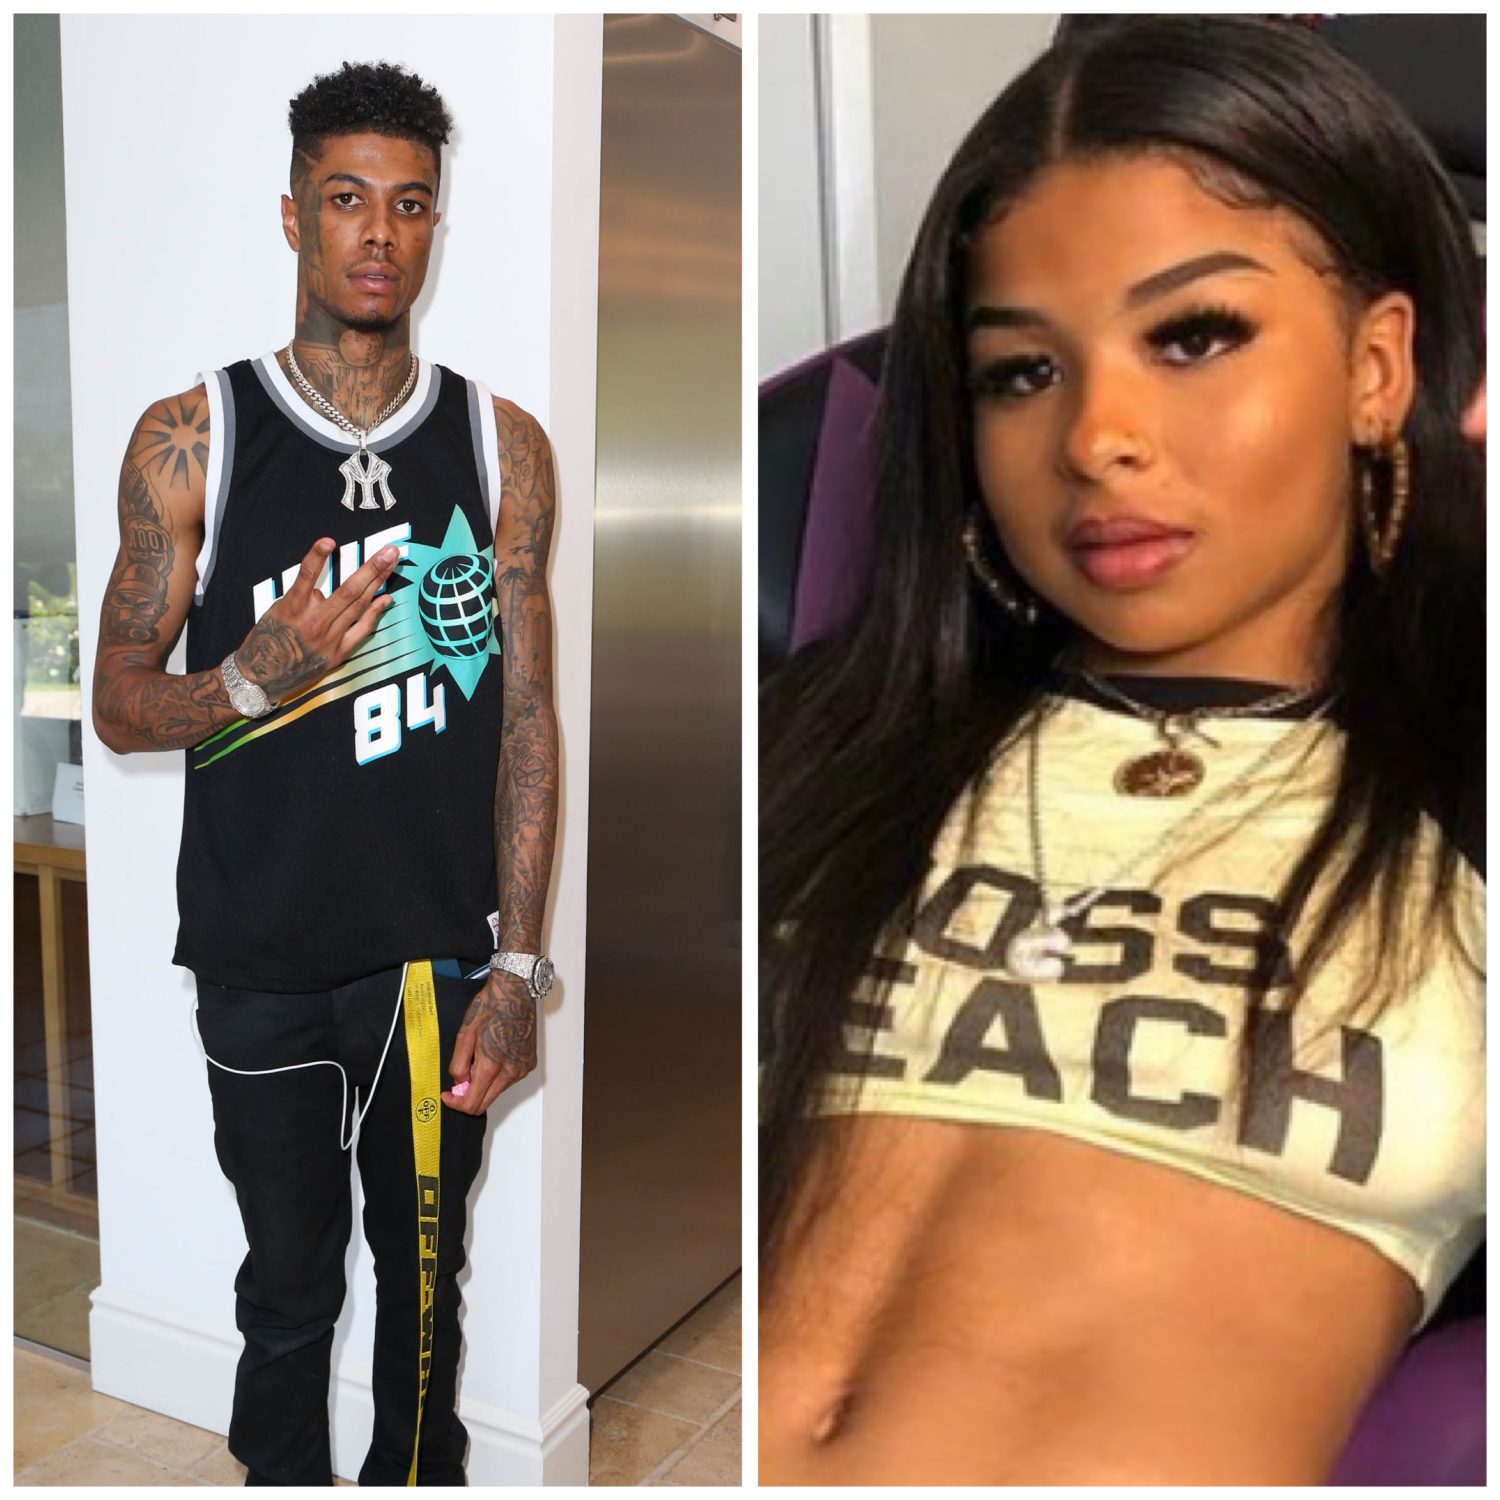 Video) Blueface Says He's Not Responsible For Chrisean Rock Getting Another Tattoo Of His Name: "Why Y'all Give A Crap So Much?"